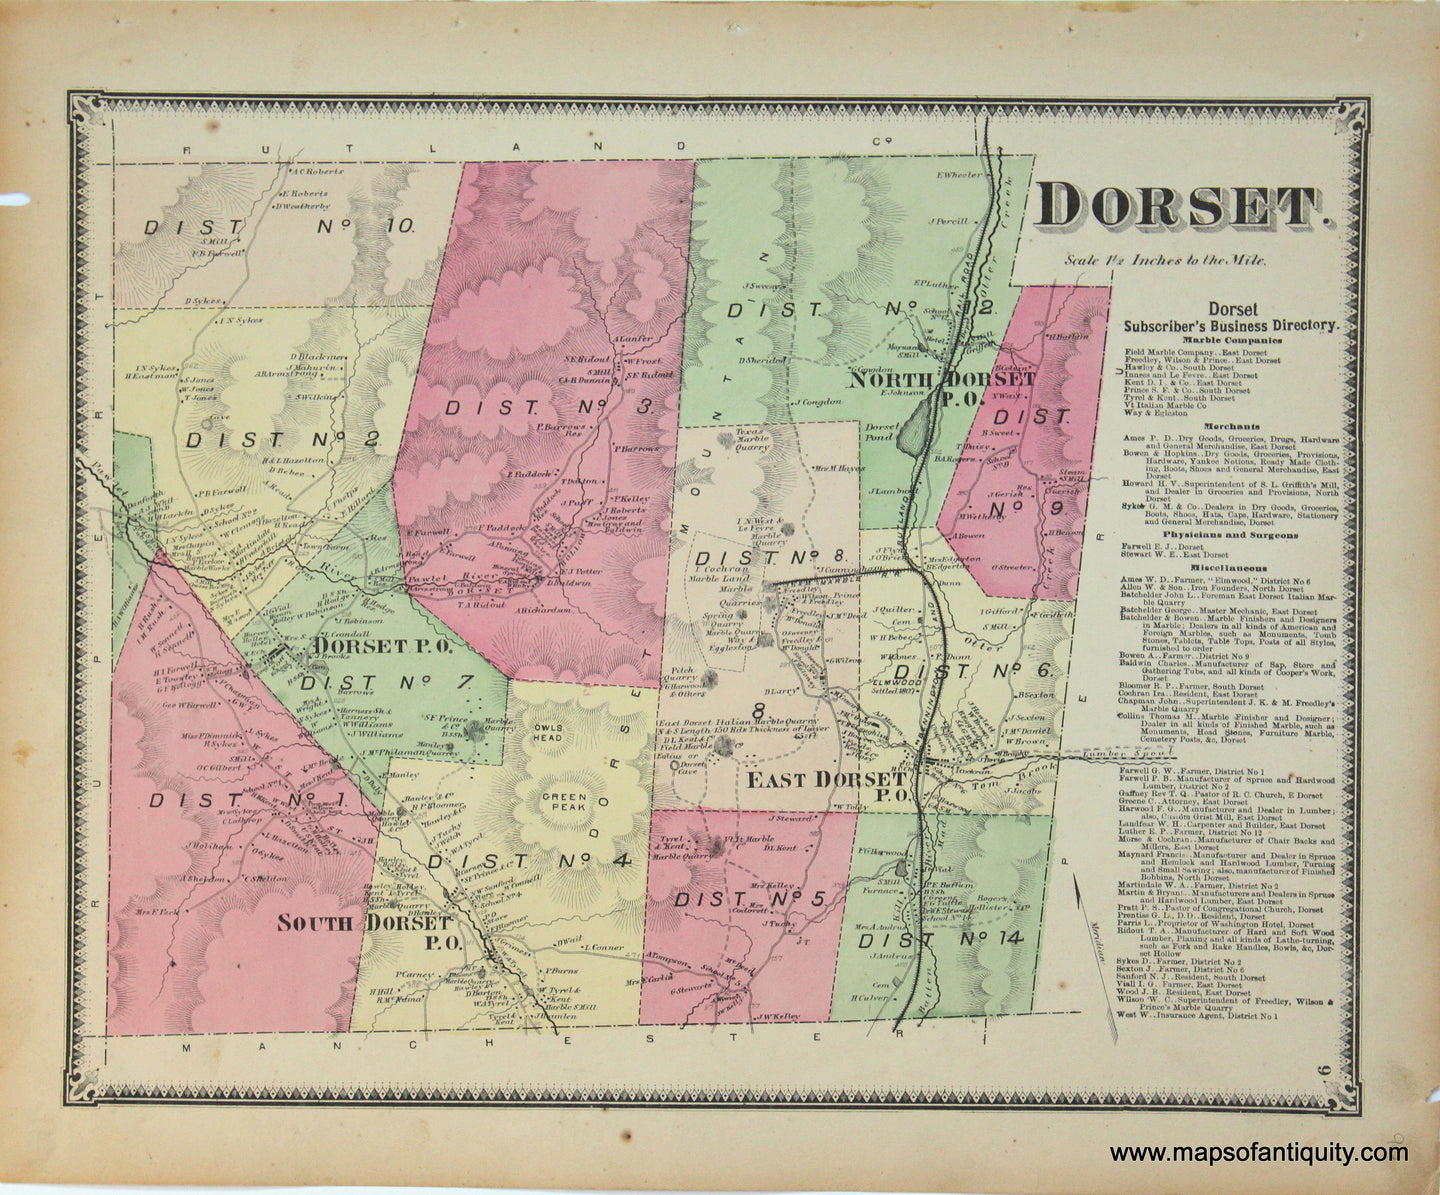 Antique-Hand-Colored-Map-Dorset-VT---Vermont-**********-United-States-Northeast-1869-Beers-Maps-Of-Antiquity